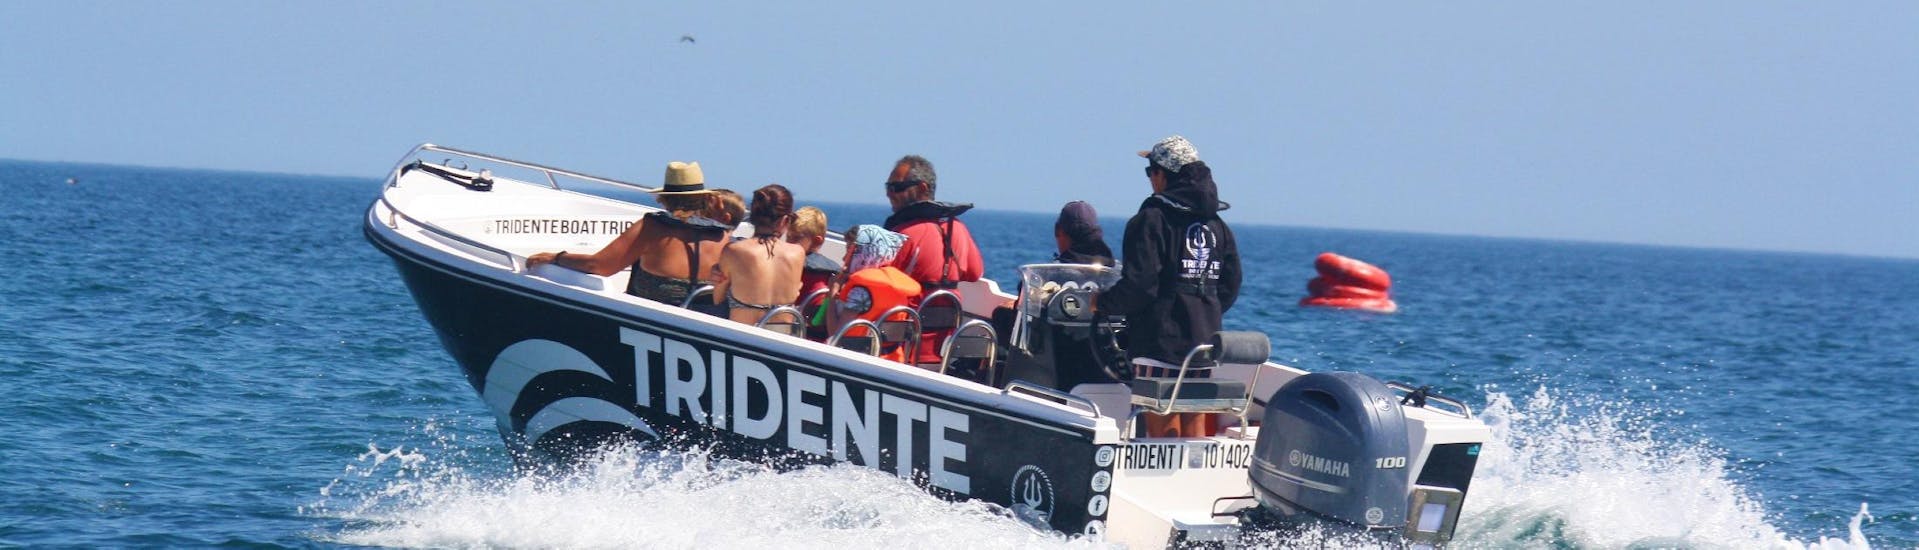 On a Boat Trip to Benagil Cave from Armação De Pêra with Tridente Boat Trips Algarve, the passengers are enjoying the ride along the Algarve coast in the company of their experienced captain.